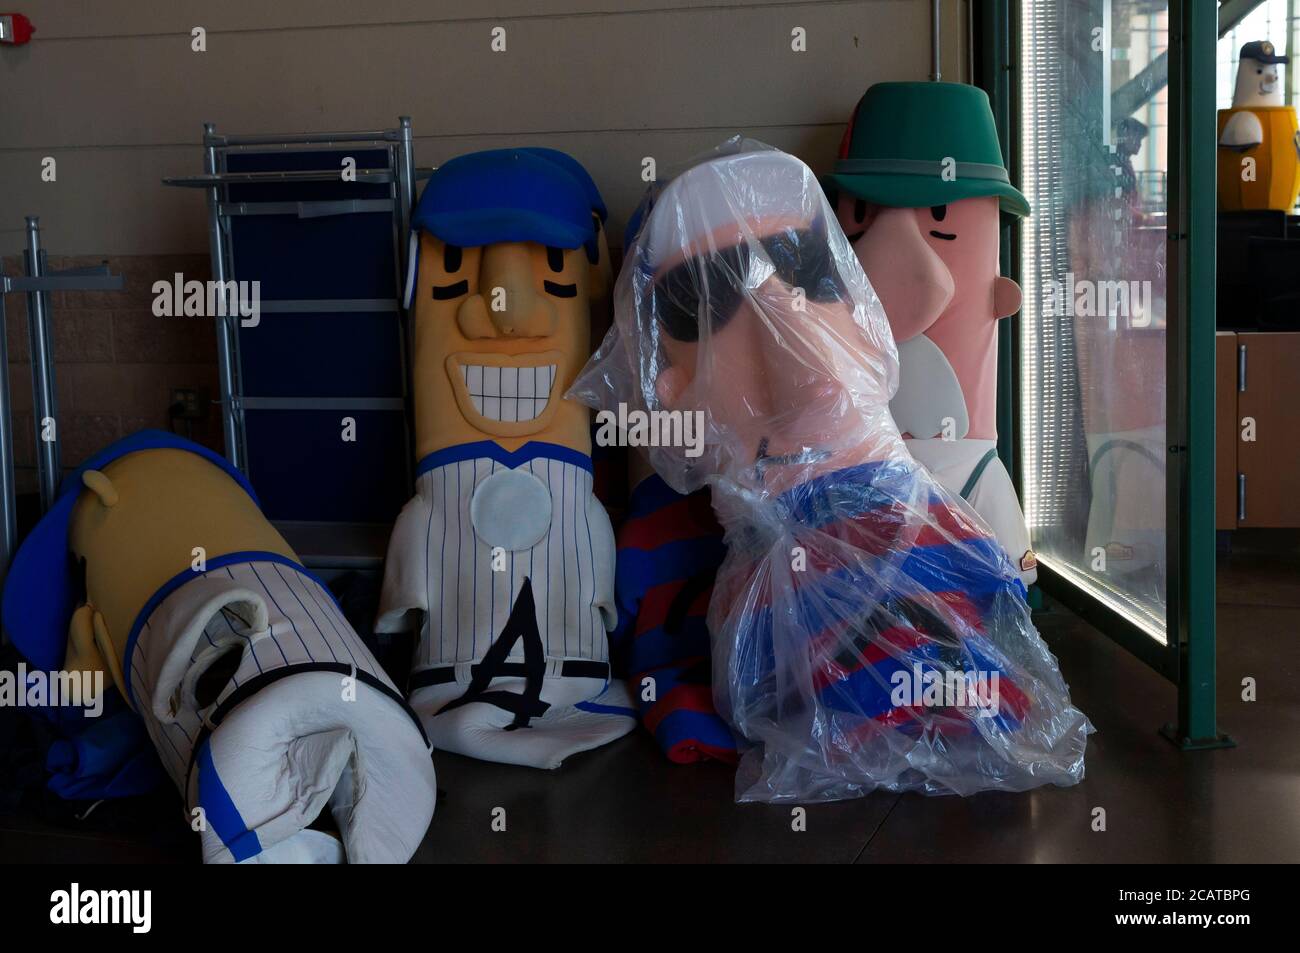 Milwaukee, USA. August 8, 2020: A favorite tradition the Brewer Sausage costumes lay up against a wall inside Miller Park before the Major League Baseball game between the Milwaukee Brewers and the Cincinnati Reds at Miller Park in Milwaukee, WI. The Sausage Racers are not being used this year. John Fisher/CSM Credit: Cal Sport Media/Alamy Live News Stock Photo